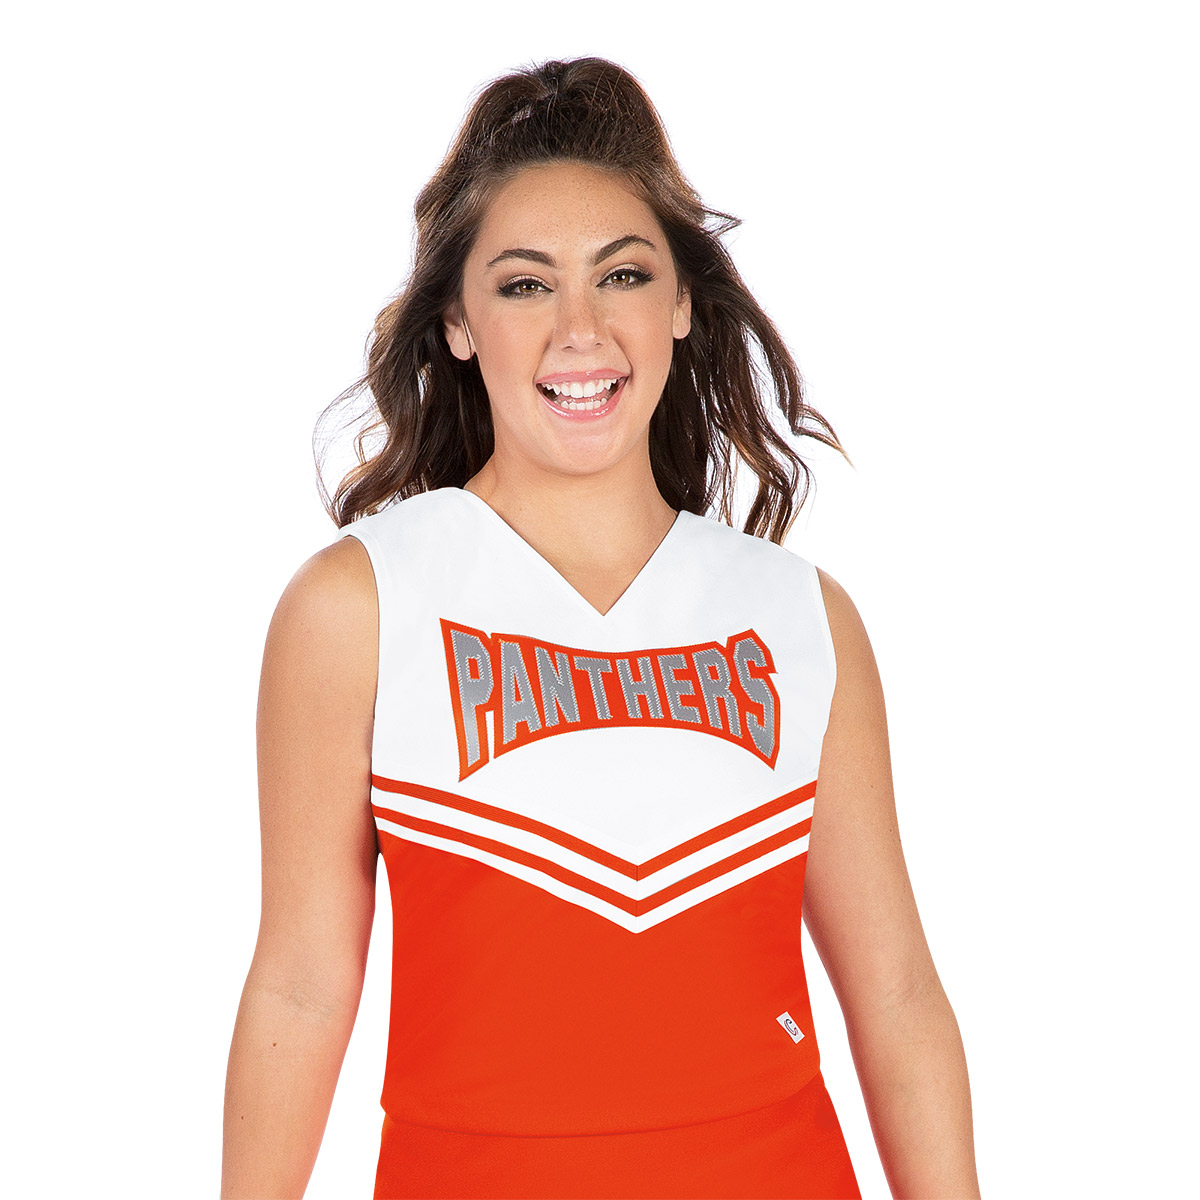 Custom Bows, High-quality cheerleading uniforms, cheer shoes, cheer bows,  cheer accessories, and more